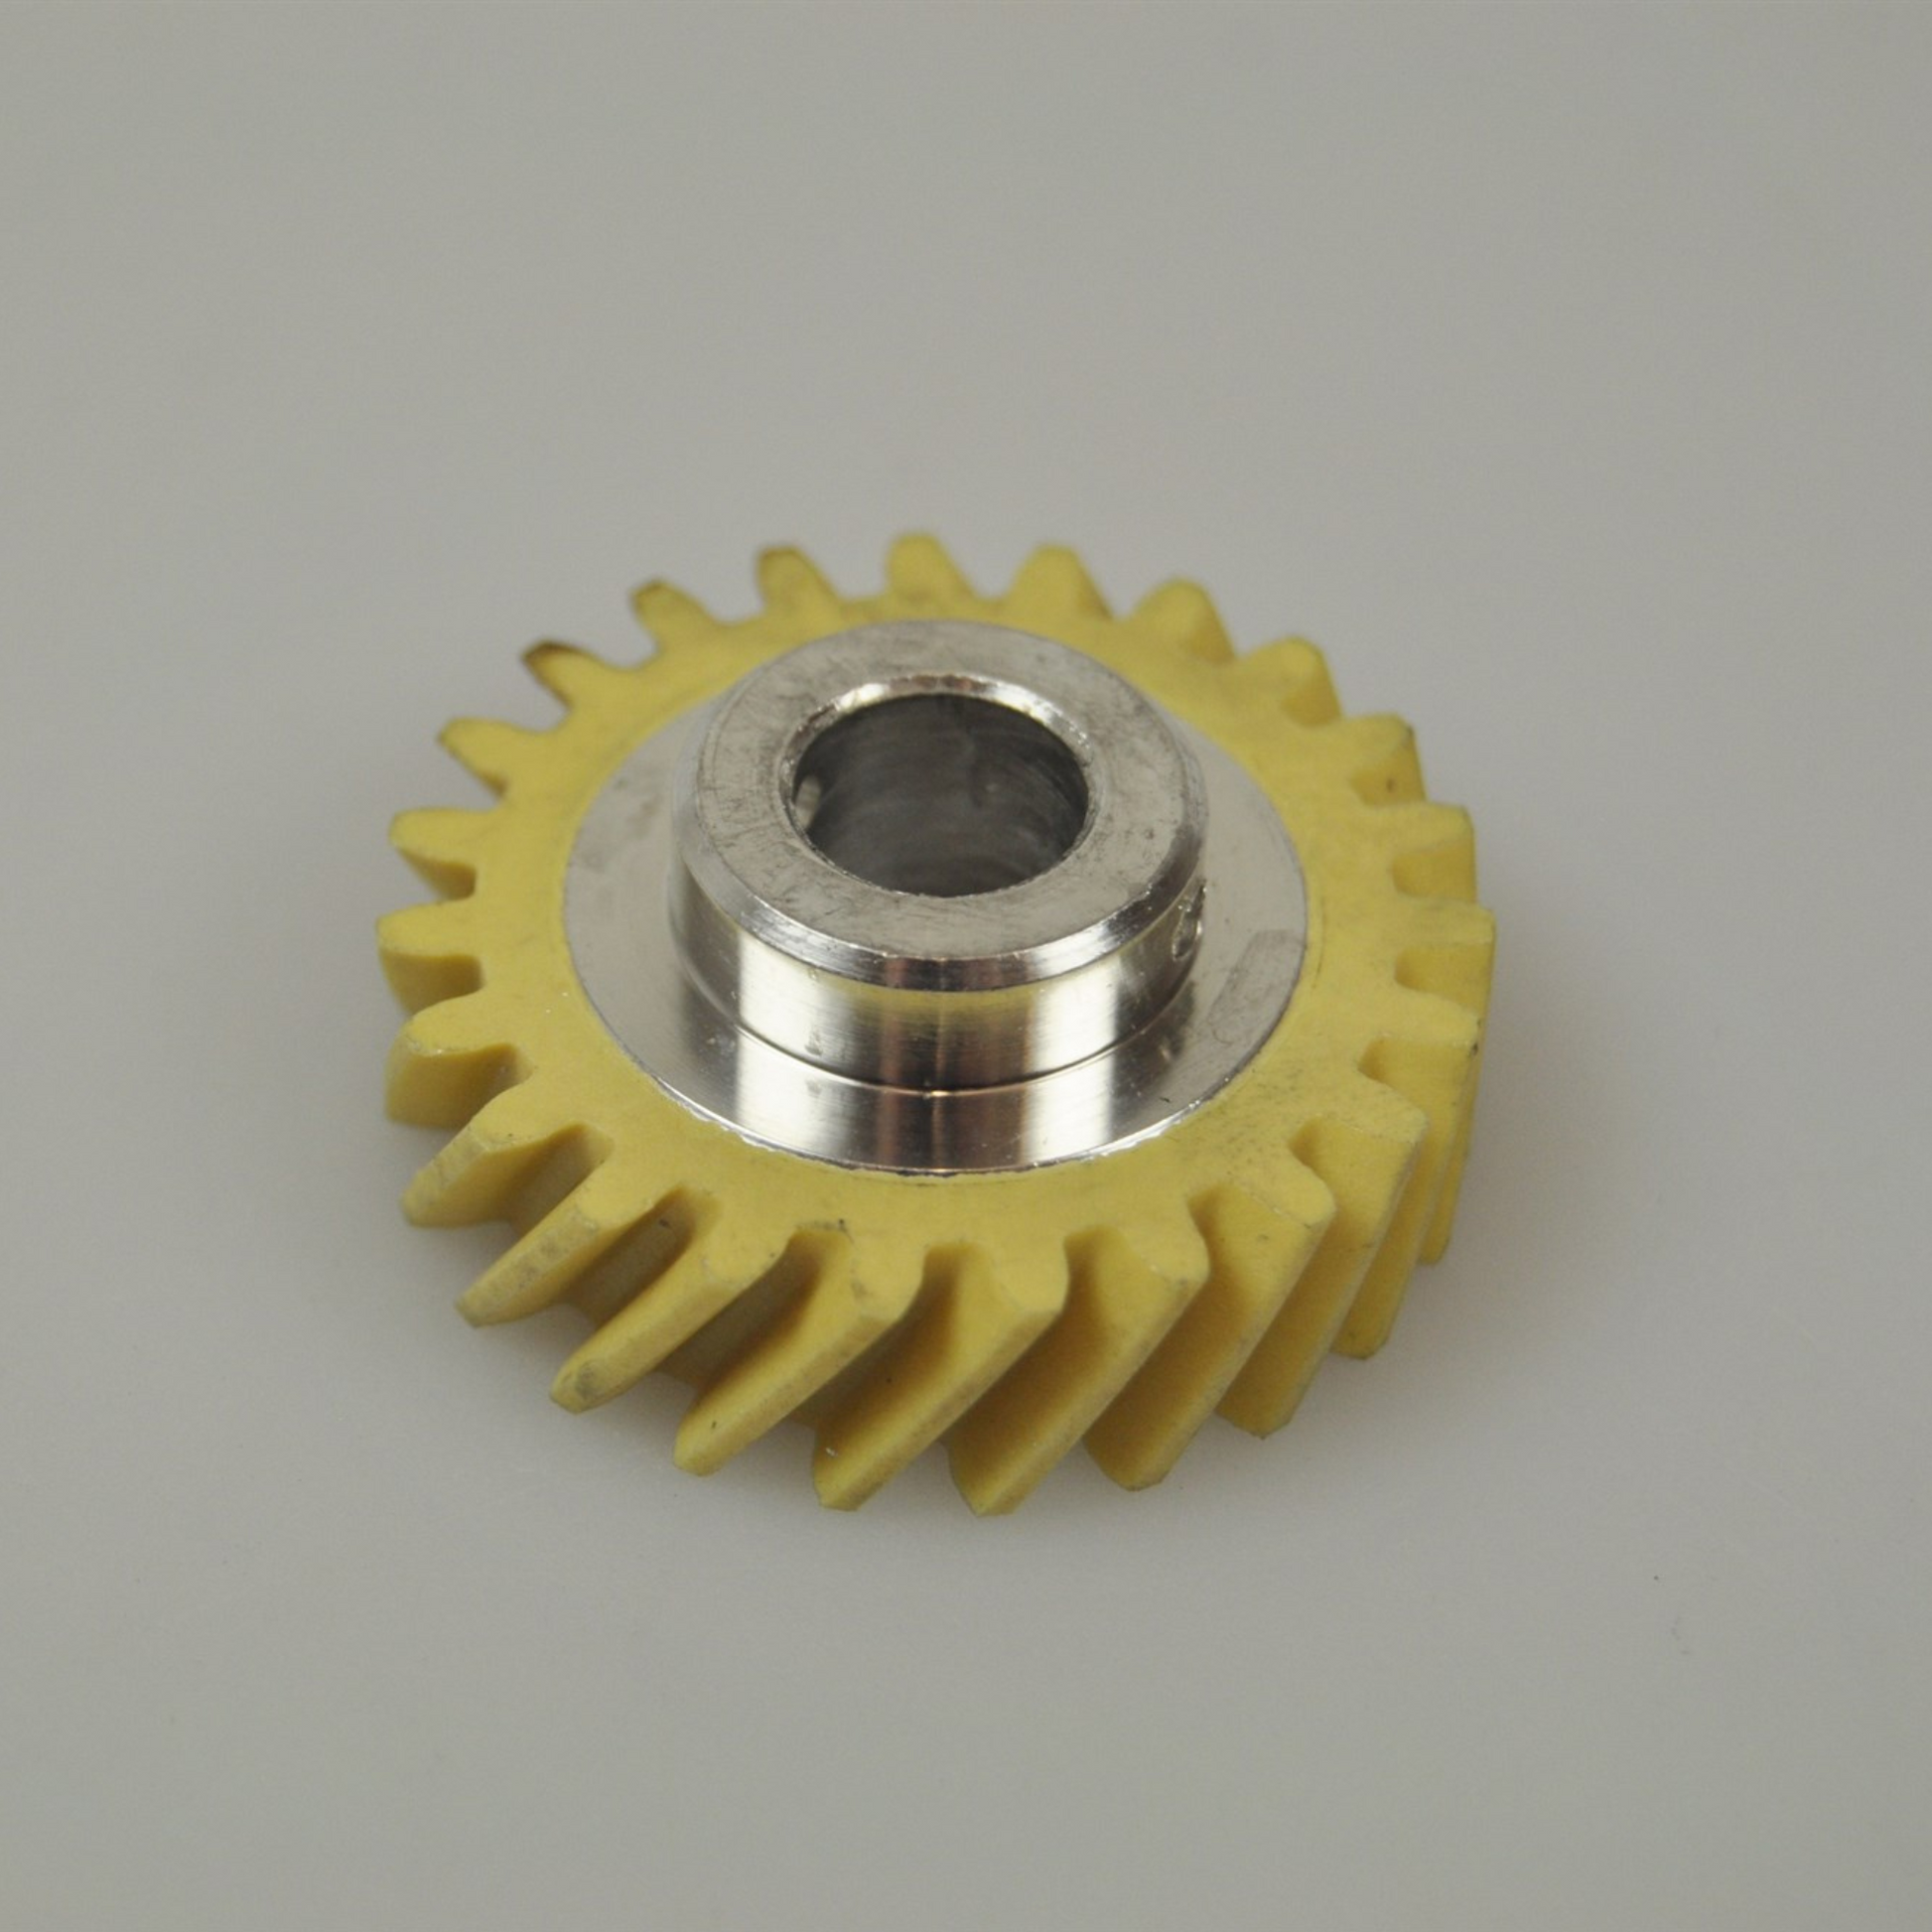 KitchenAid 5KSM150 Worm Gear Replacement of Stand Mixer Spare Part Them Parts